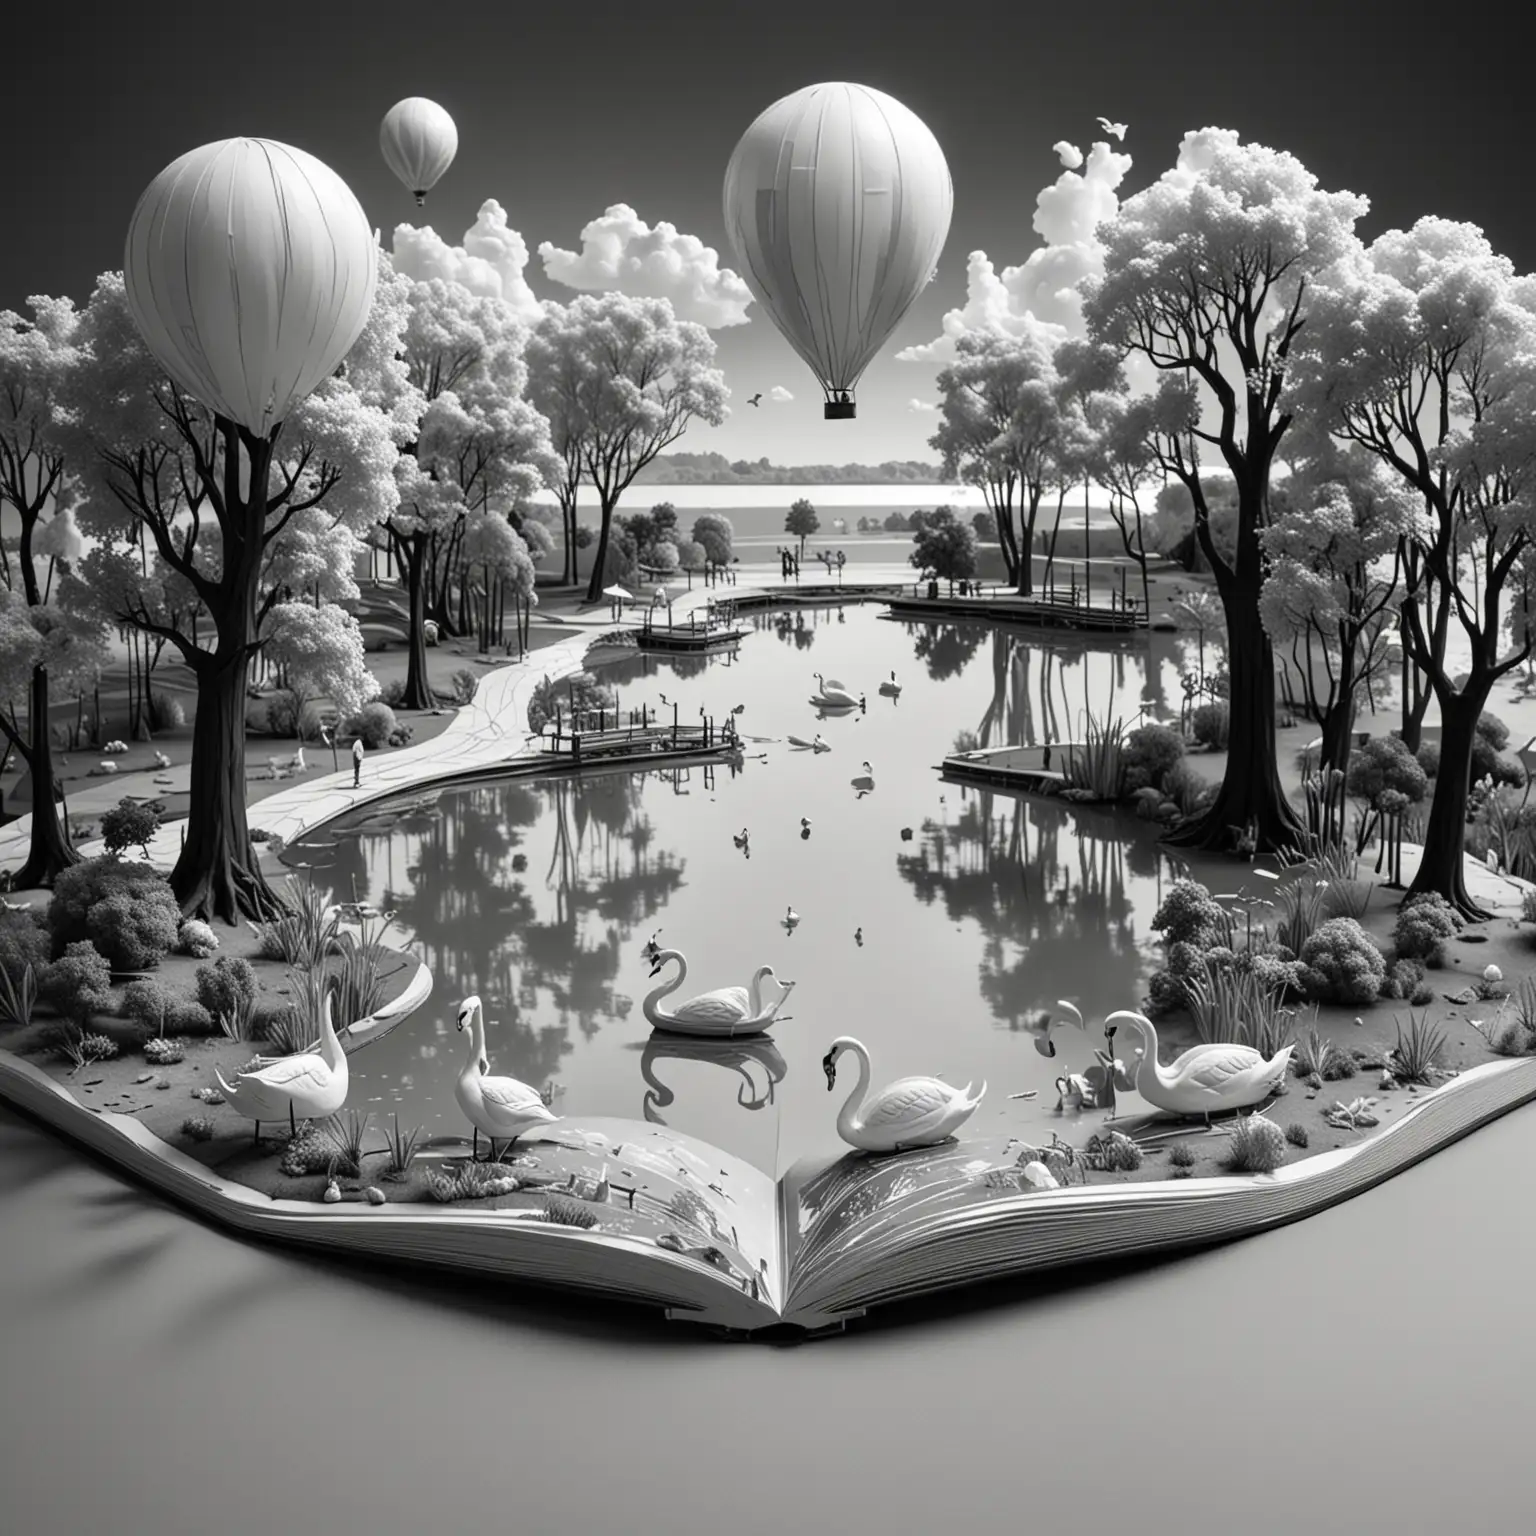 Artist Crafting a Black and White PopUp Book Featuring a Park Scene